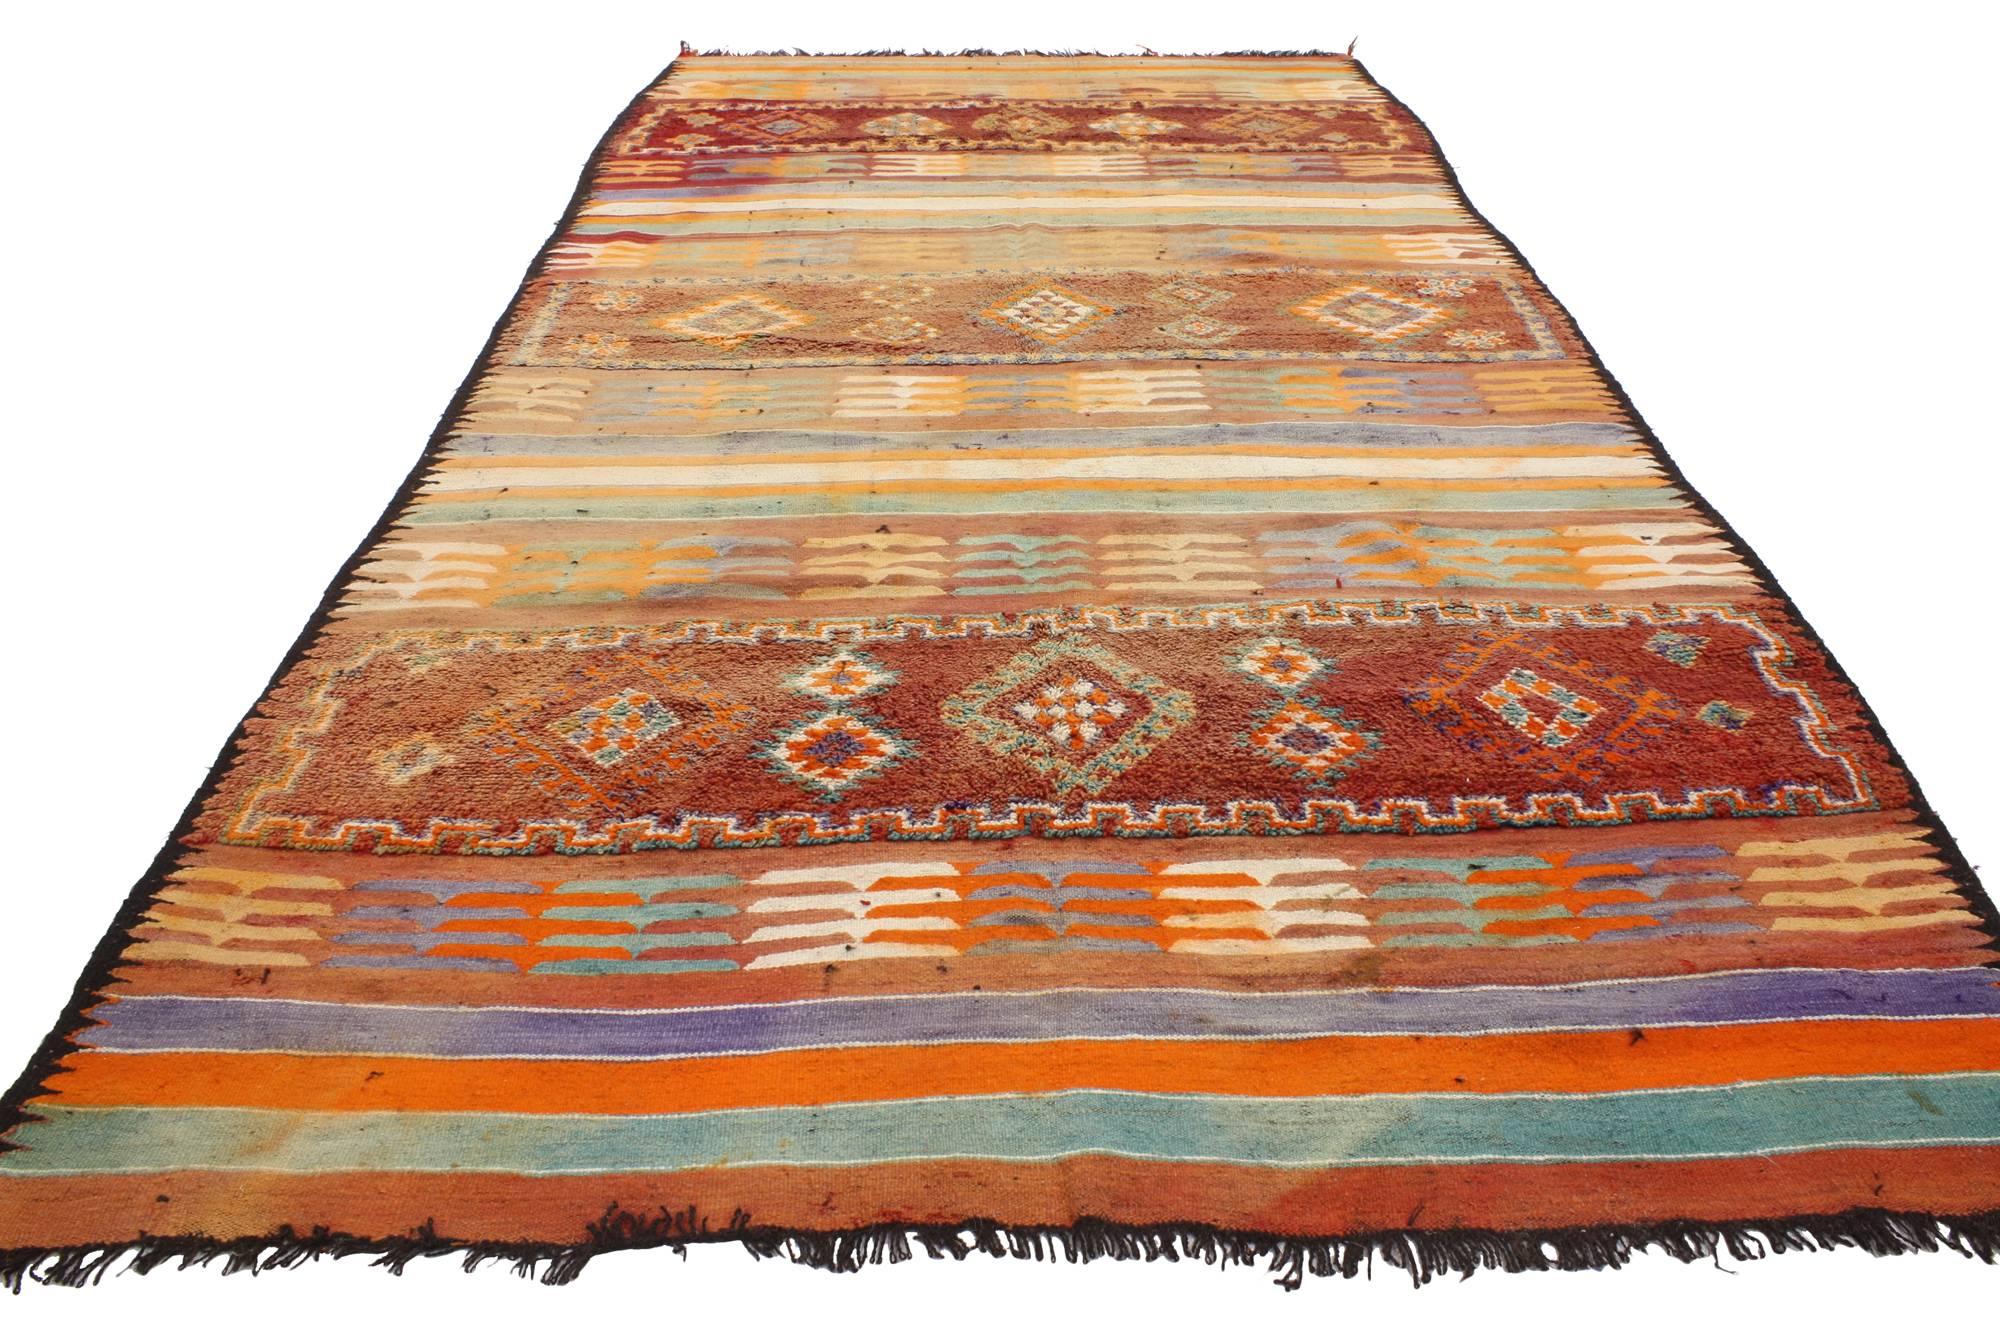 Hand-Woven Vintage Berber Moroccan Kilim Rug with Modern Cabin Style, Flat-weave Kilim Rug For Sale